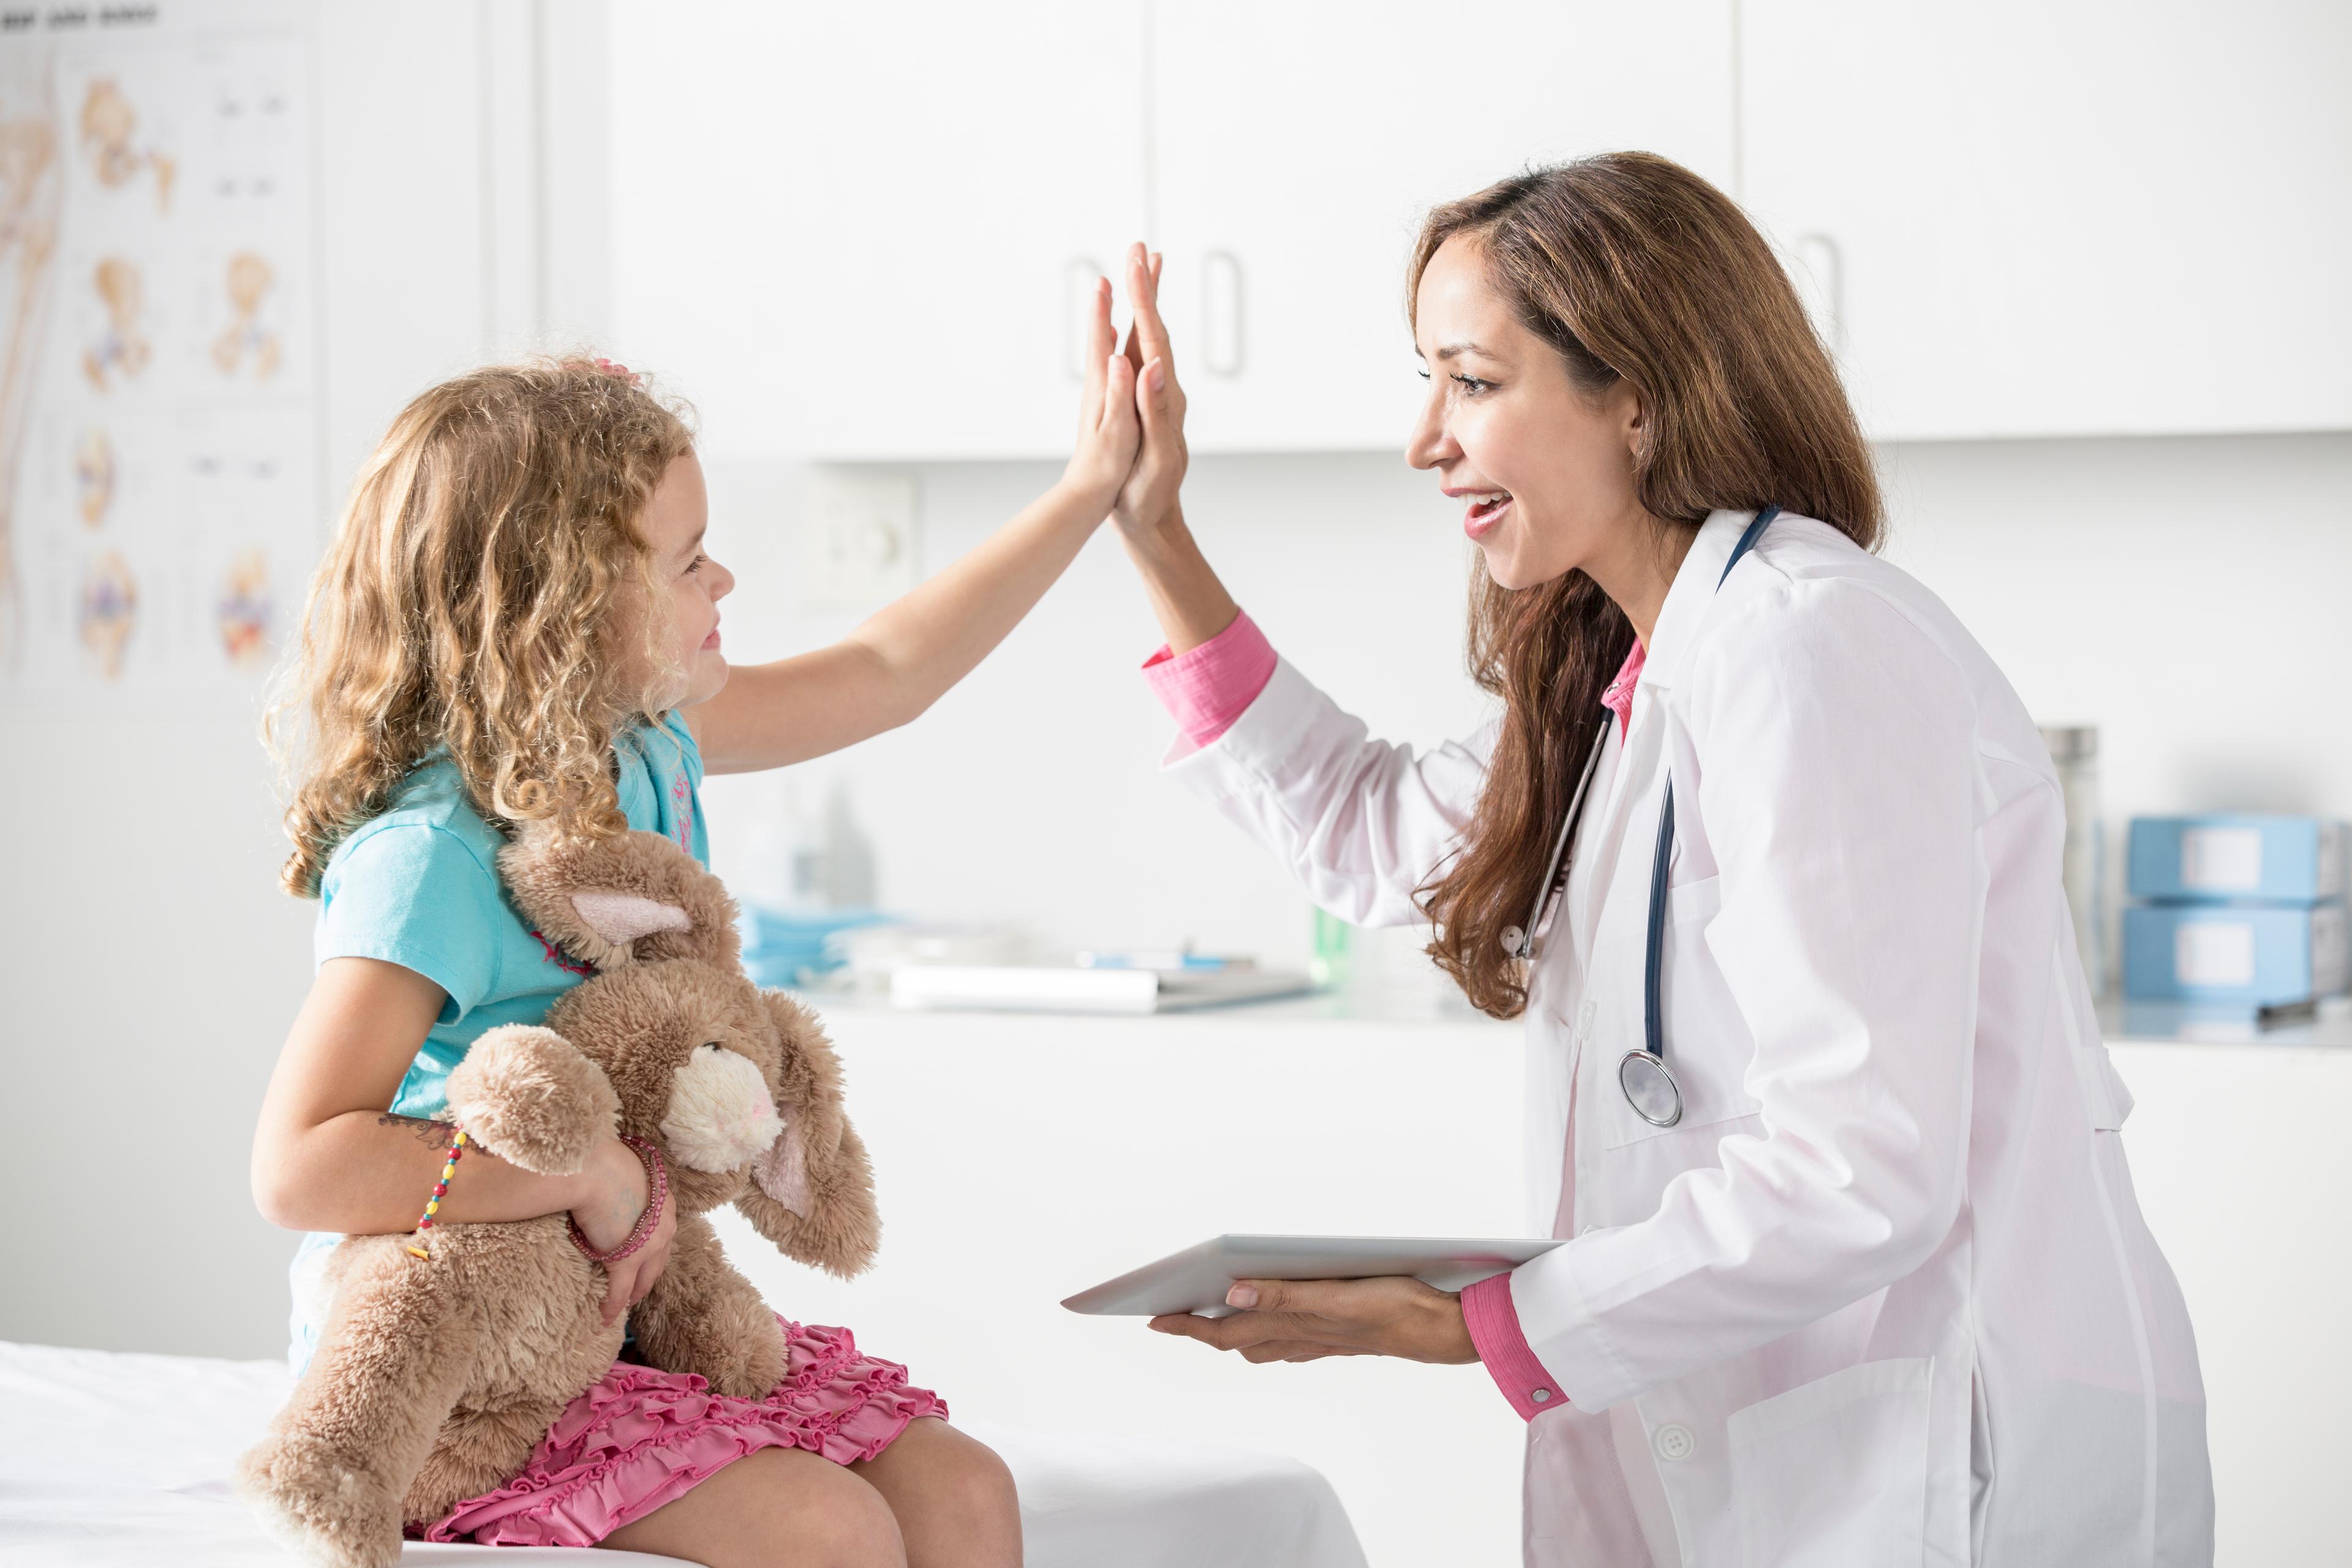 FNP vs NP - a picture of an NP high-fiving a young female patient.